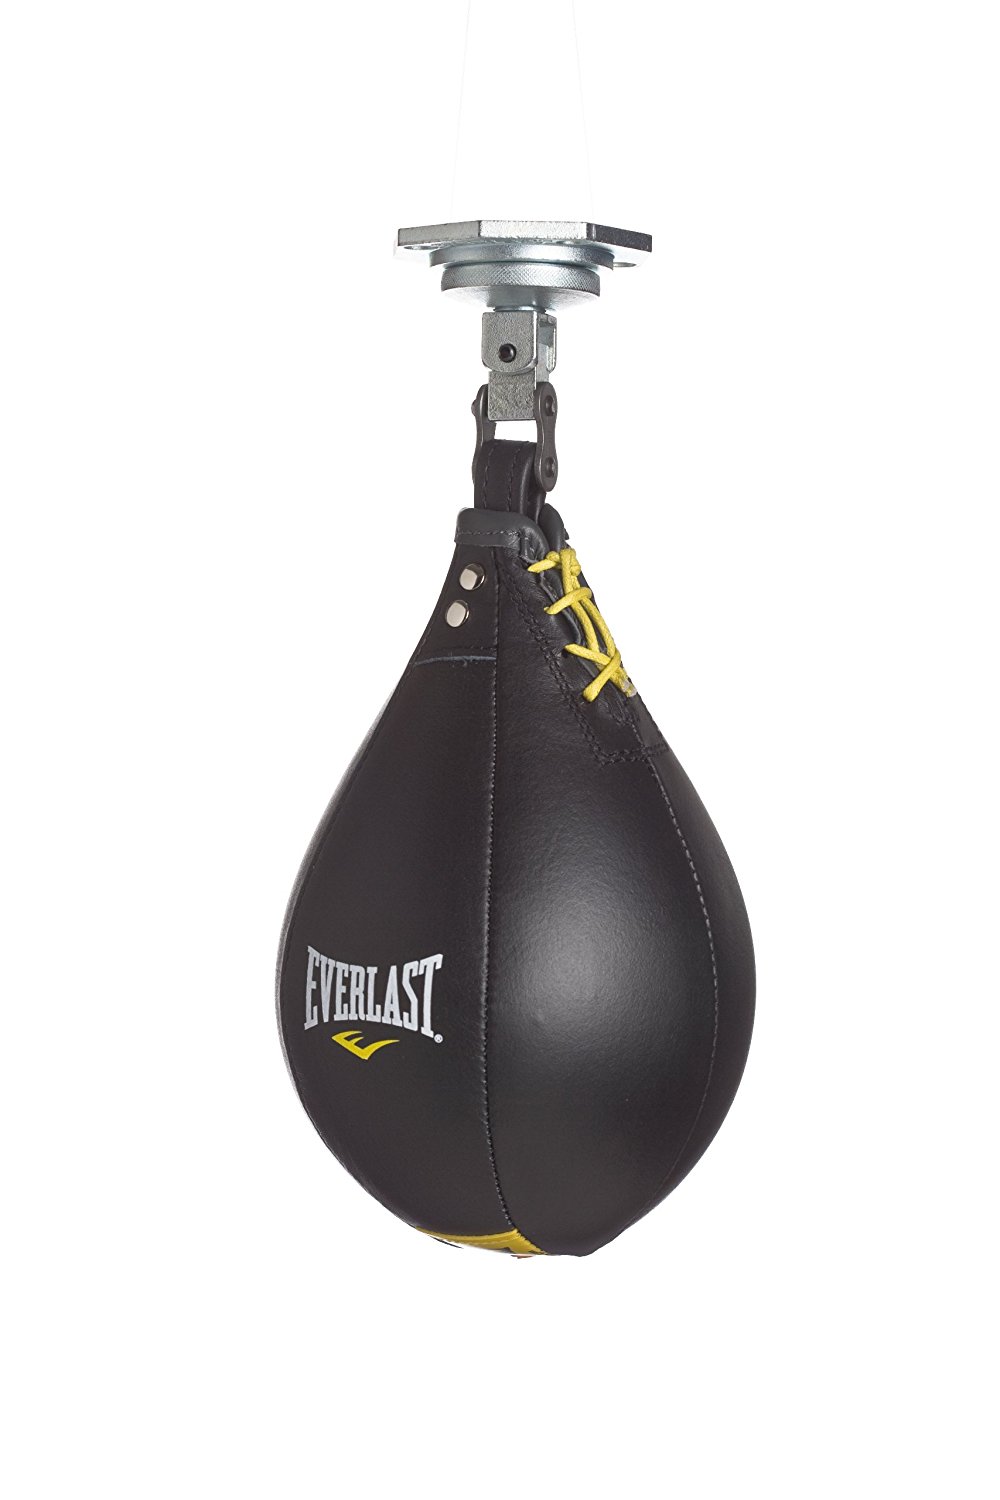 Everlast Elite Leather Speed Bag Review